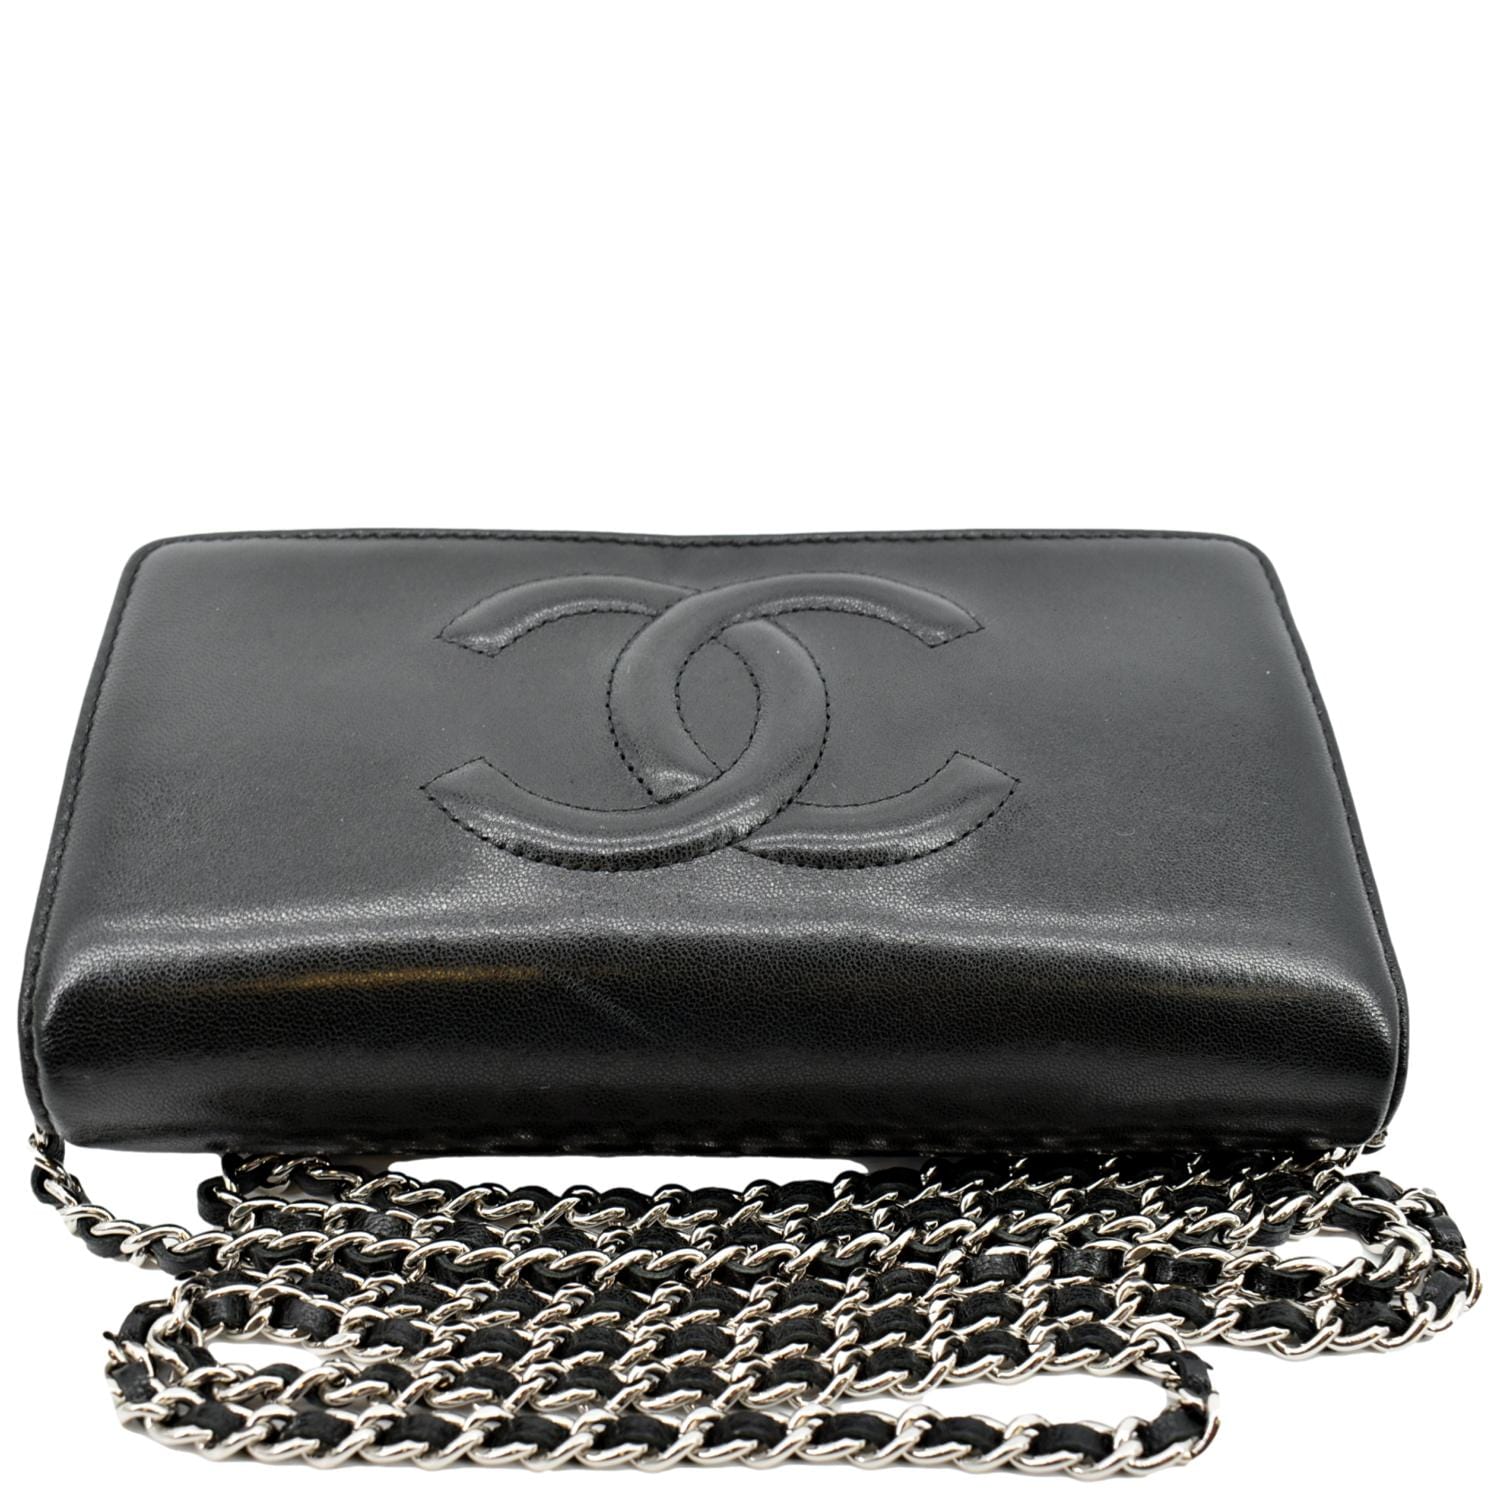 Wallet On Chain Boy patent leather crossbody bag